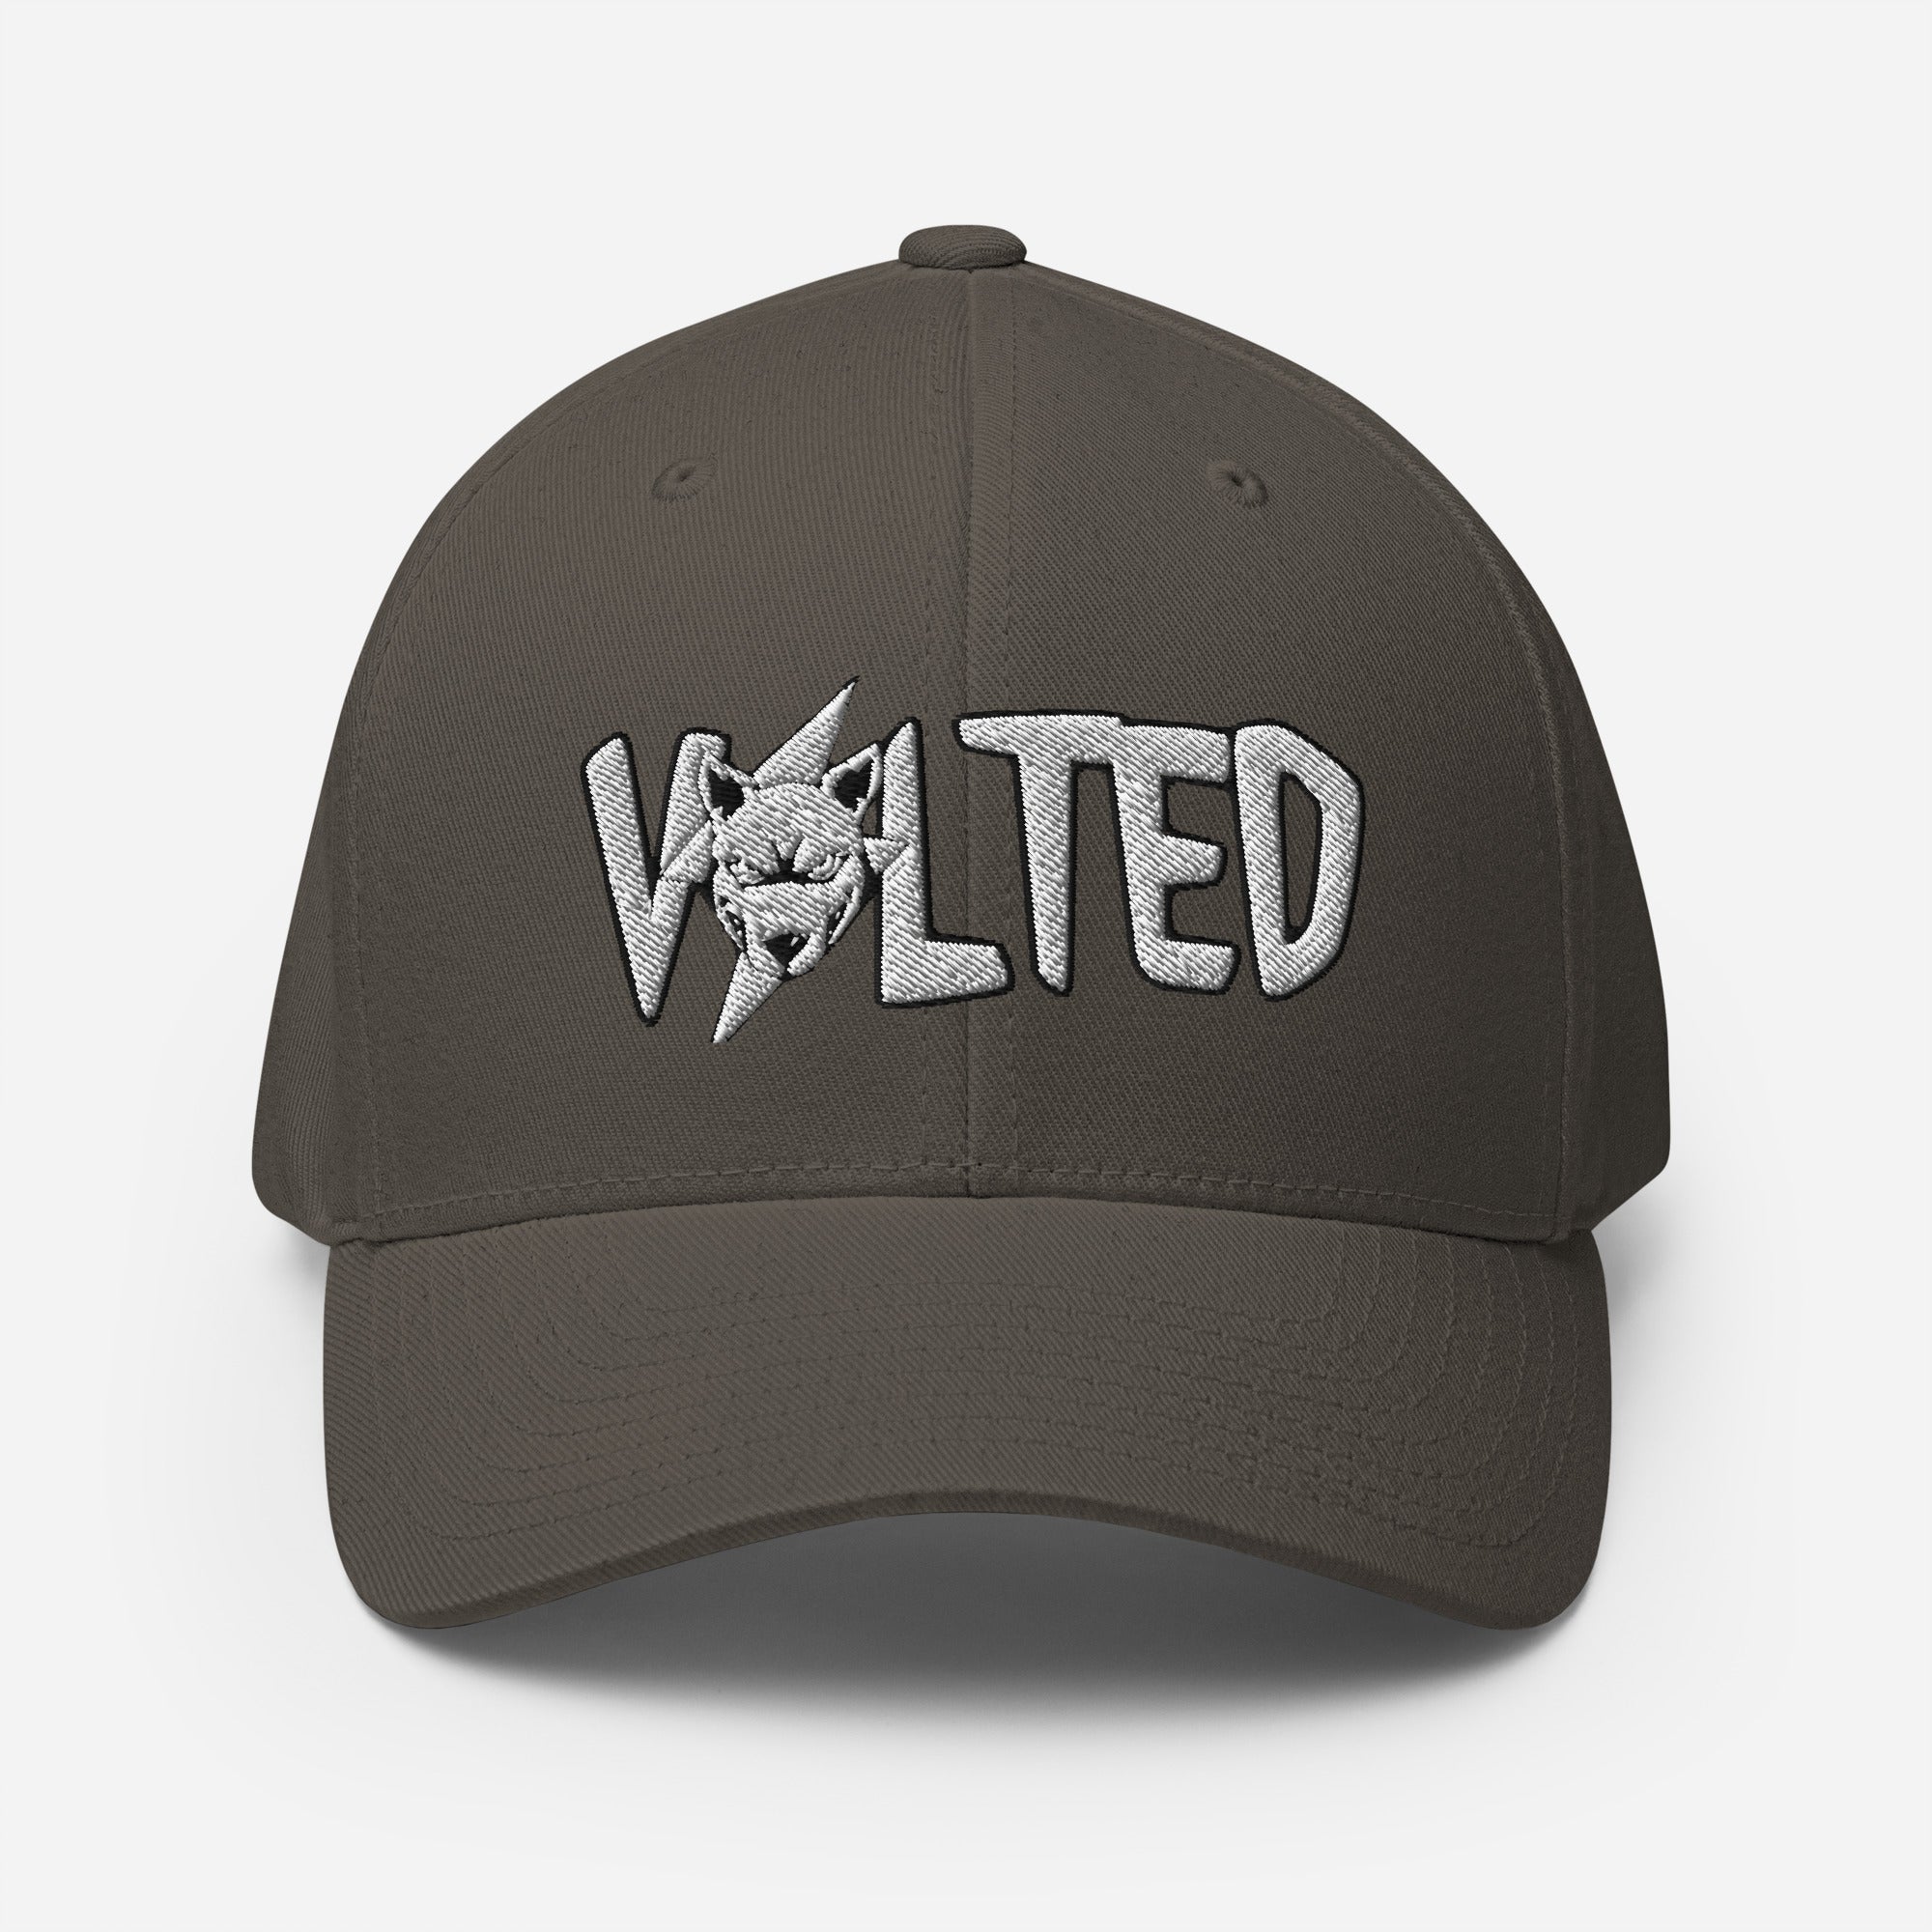 Volted Fitted Hat⚡️NFTees - NFTees365